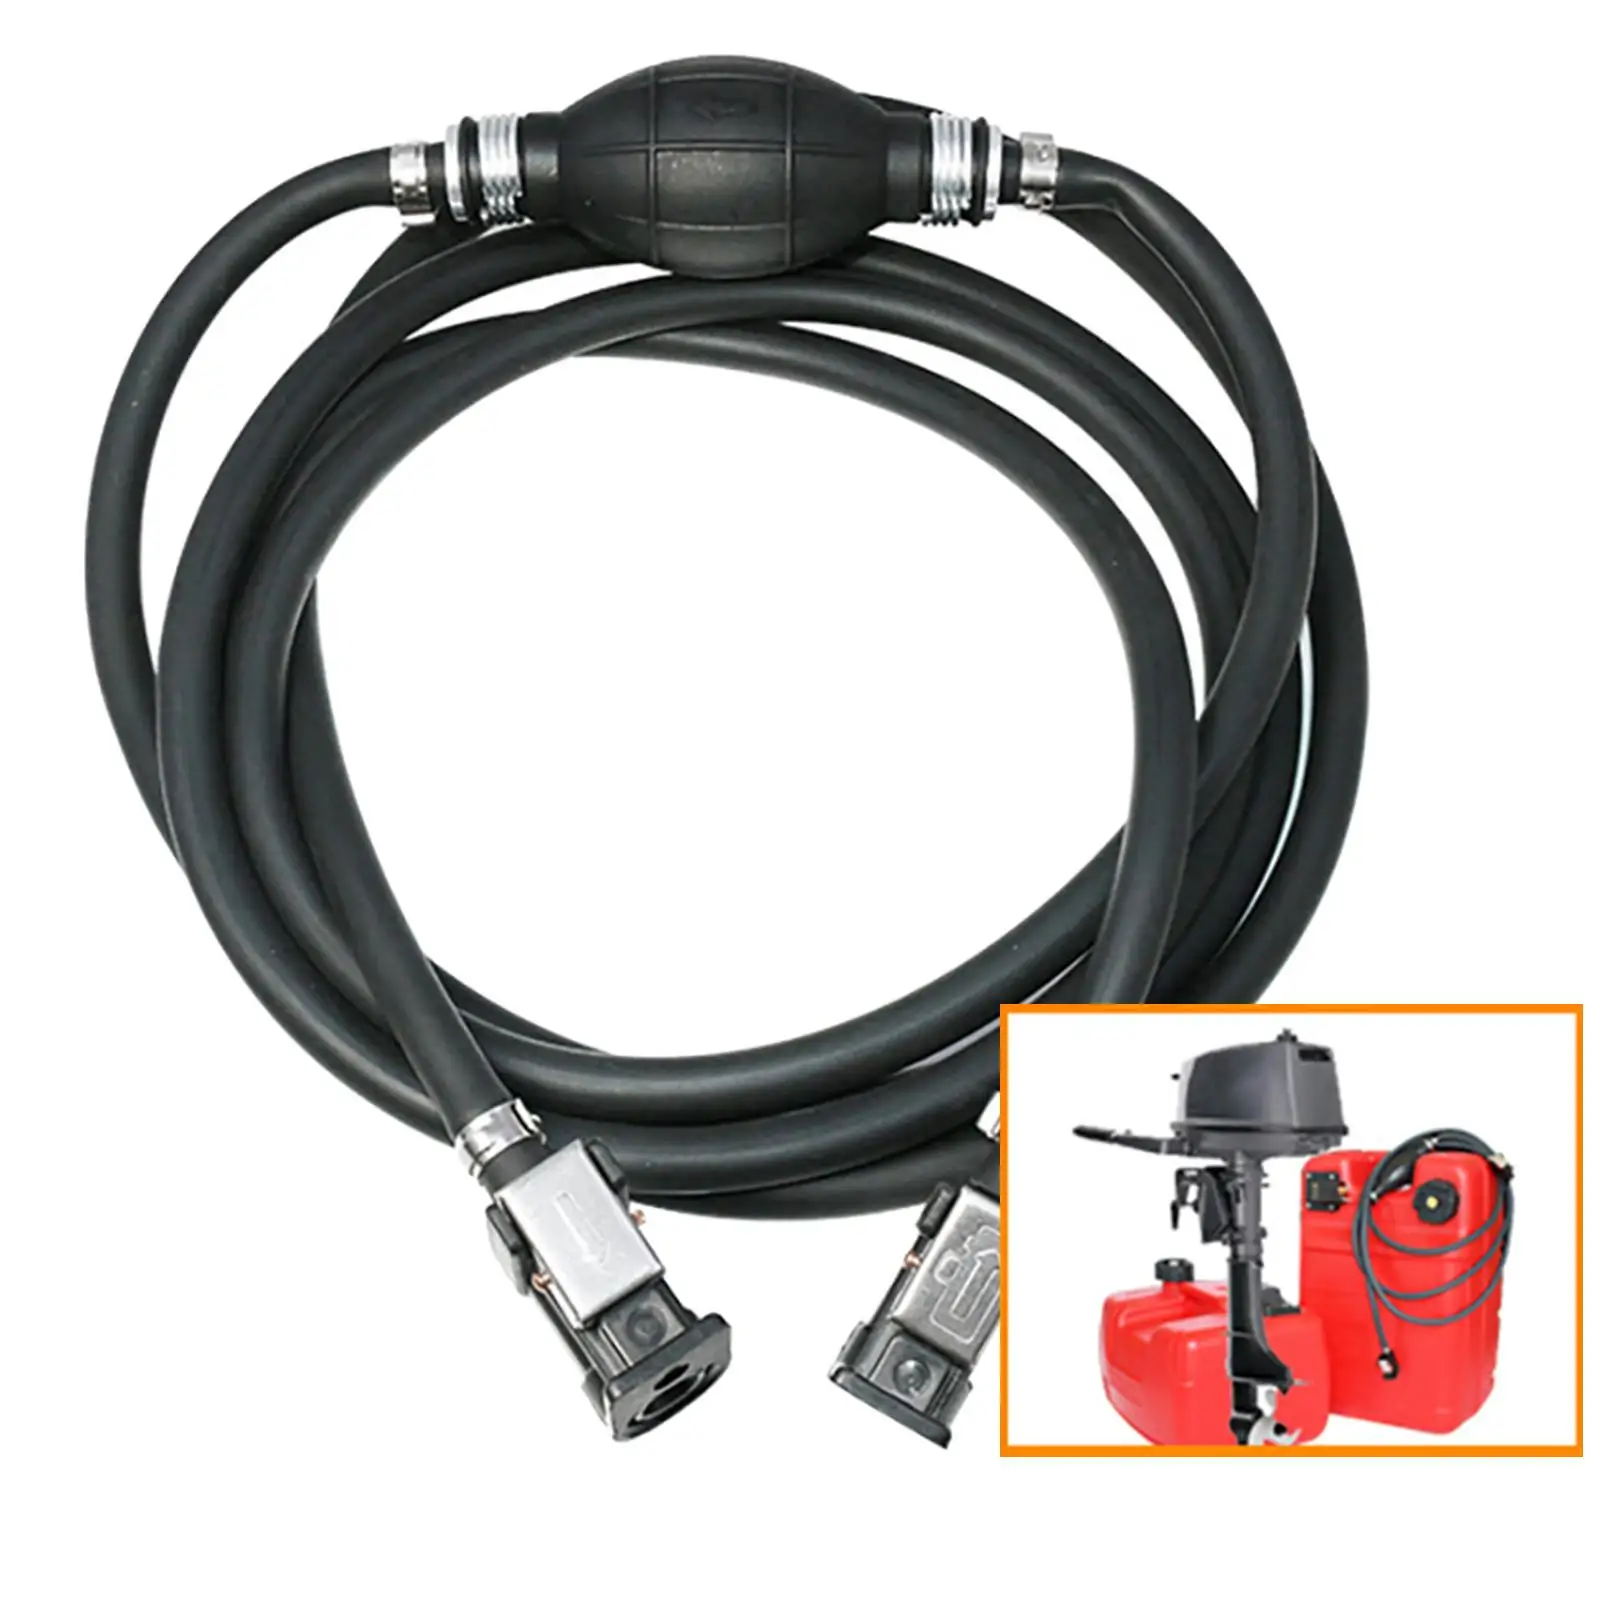 8mm 3.1M Hand Pump Engine Parts Boat Fuel Line Assembly for Motor Vehicle Marine